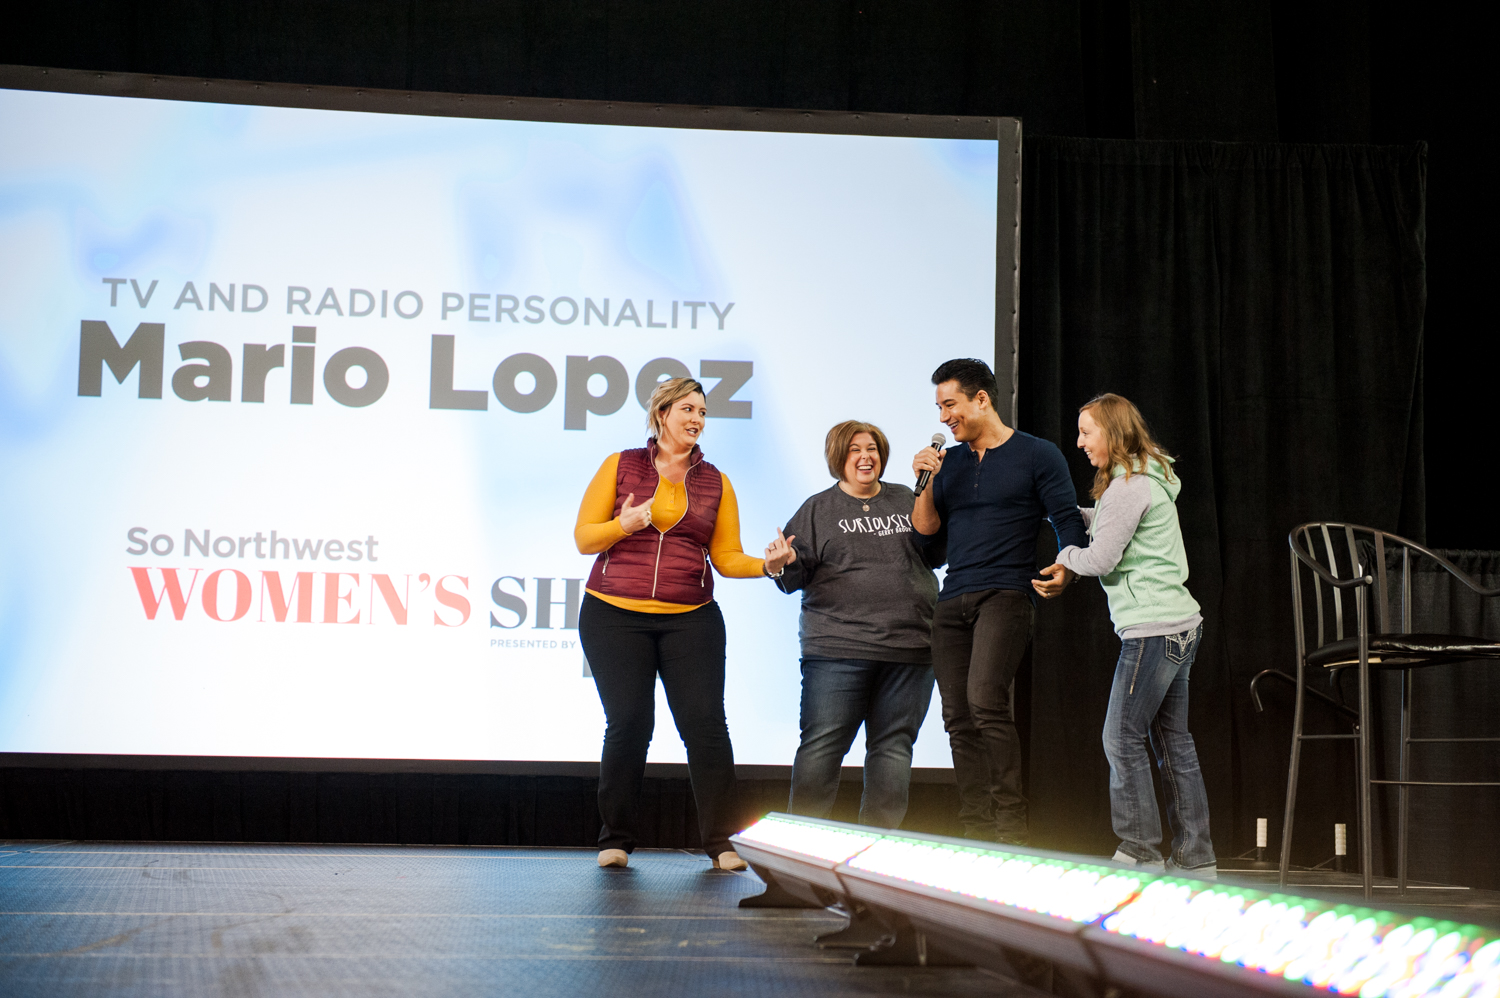 Photos: A.C. Slater (err - Mario Lopez) came to the So NW Women's Show | Seattle Refined